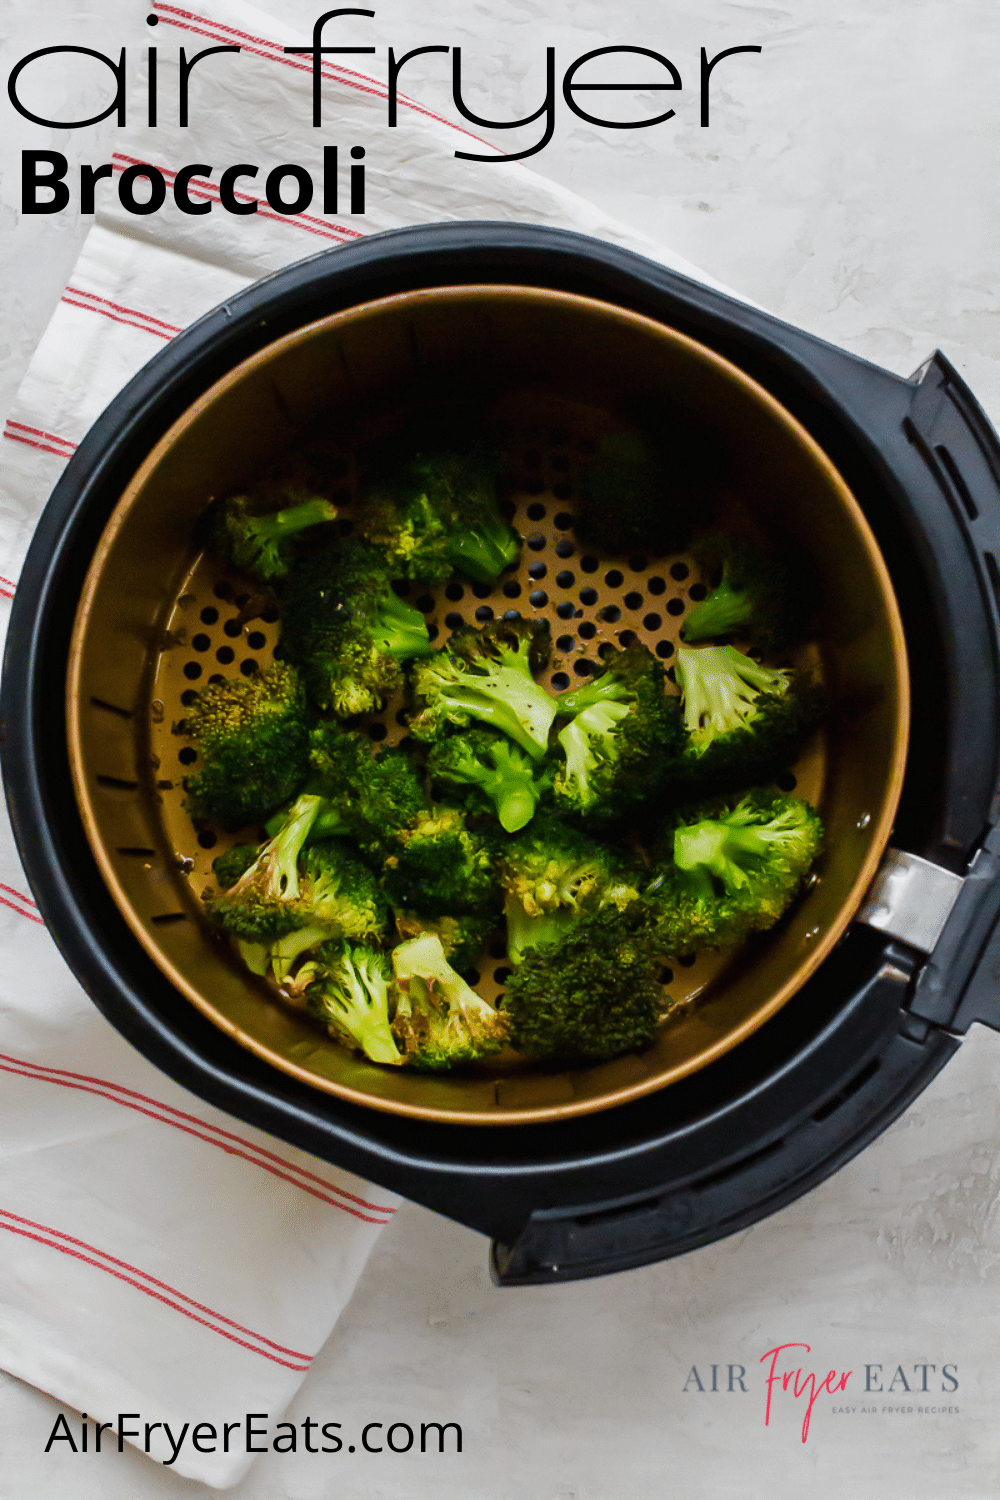 Looking for a great way to add some pizzazz to broccoli? Try air frying it! Air Fryer Broccoli is the perfect combination of crispy and tender, and you won't believe how easy it is to make! #broccoli #airfryerbroccoli #airfriedbroccoli via @vegetarianmamma